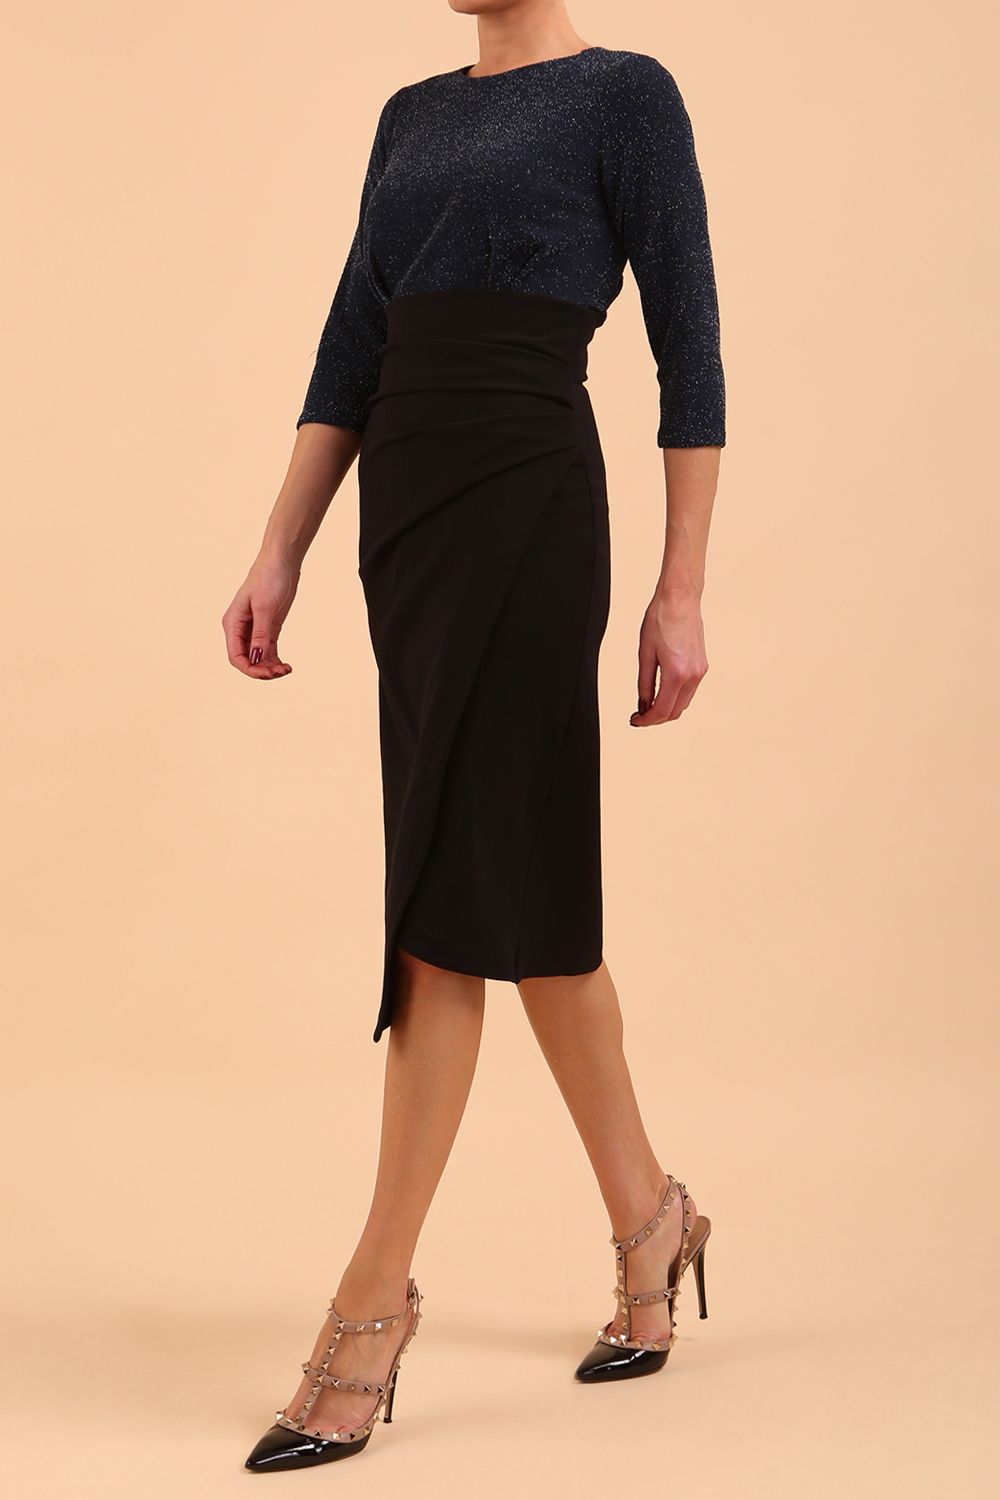 model is wearing diva catwalk contrast pencil dress with sleeve and assymetric skirt detail in black and teal sparkle front